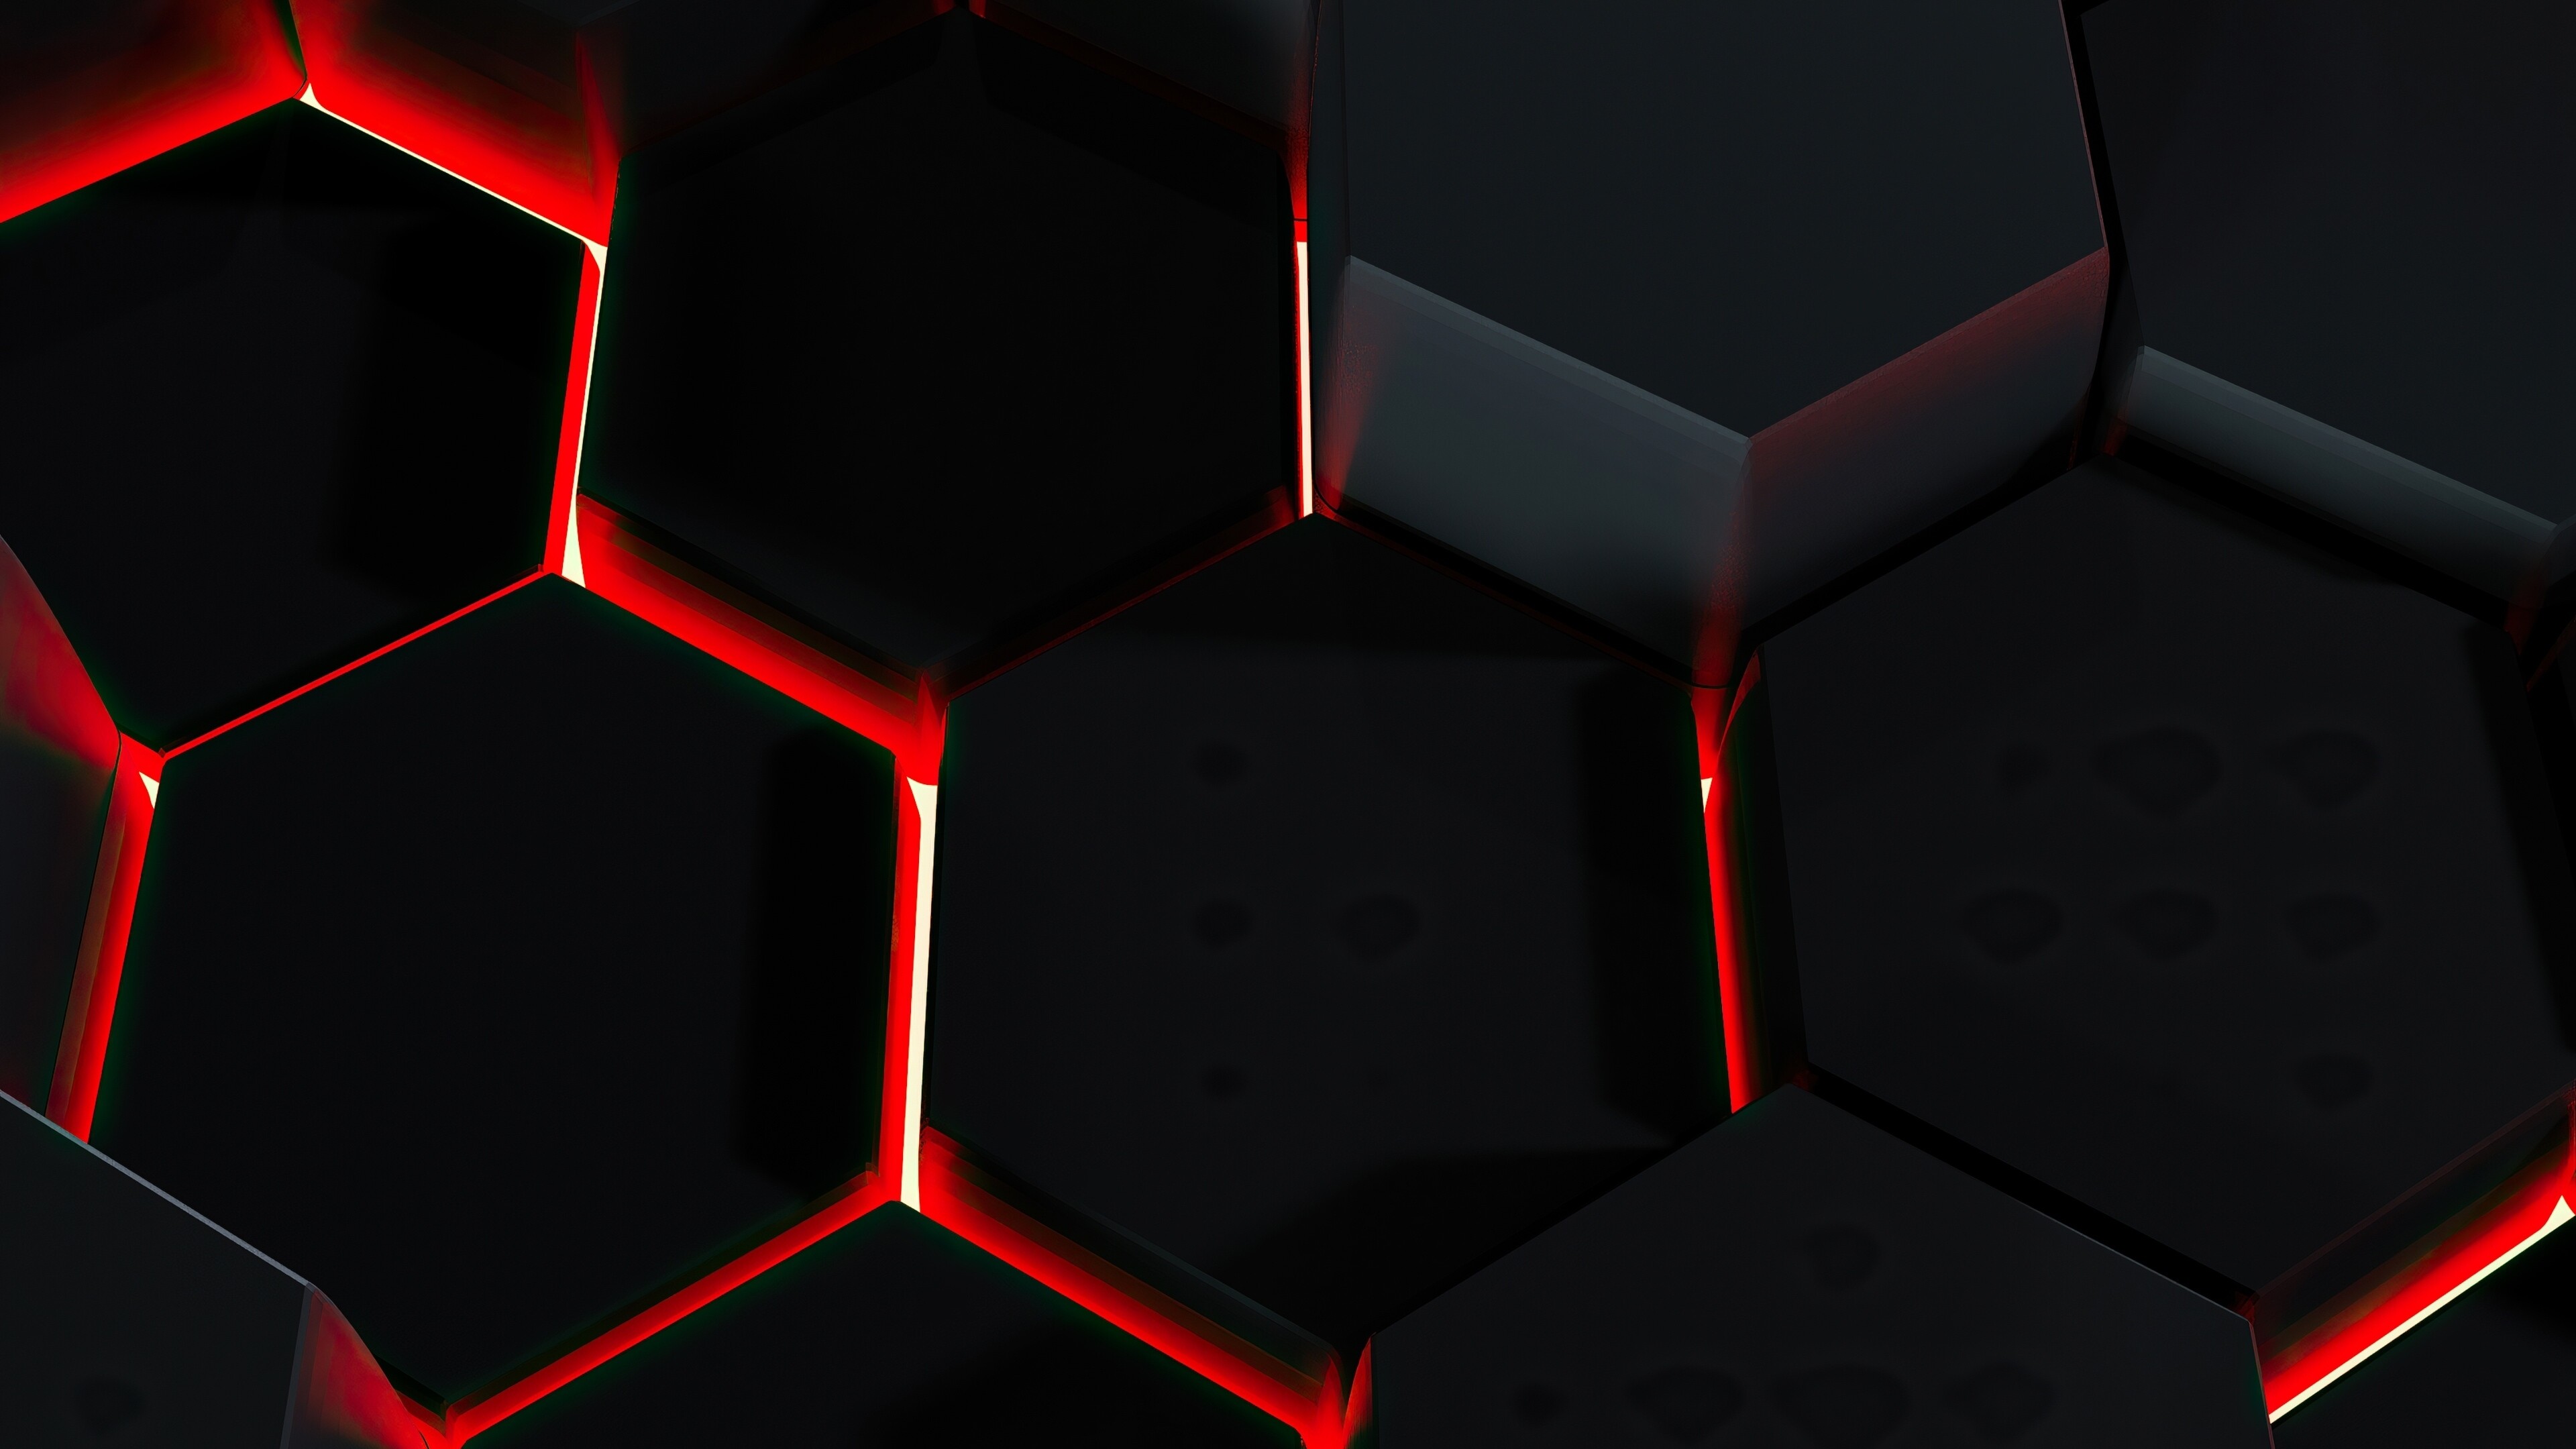 Glow in the Dark: Composite material, Glowing edges, Cell pattern, Abstract, Cells. 3840x2160 4K Background.